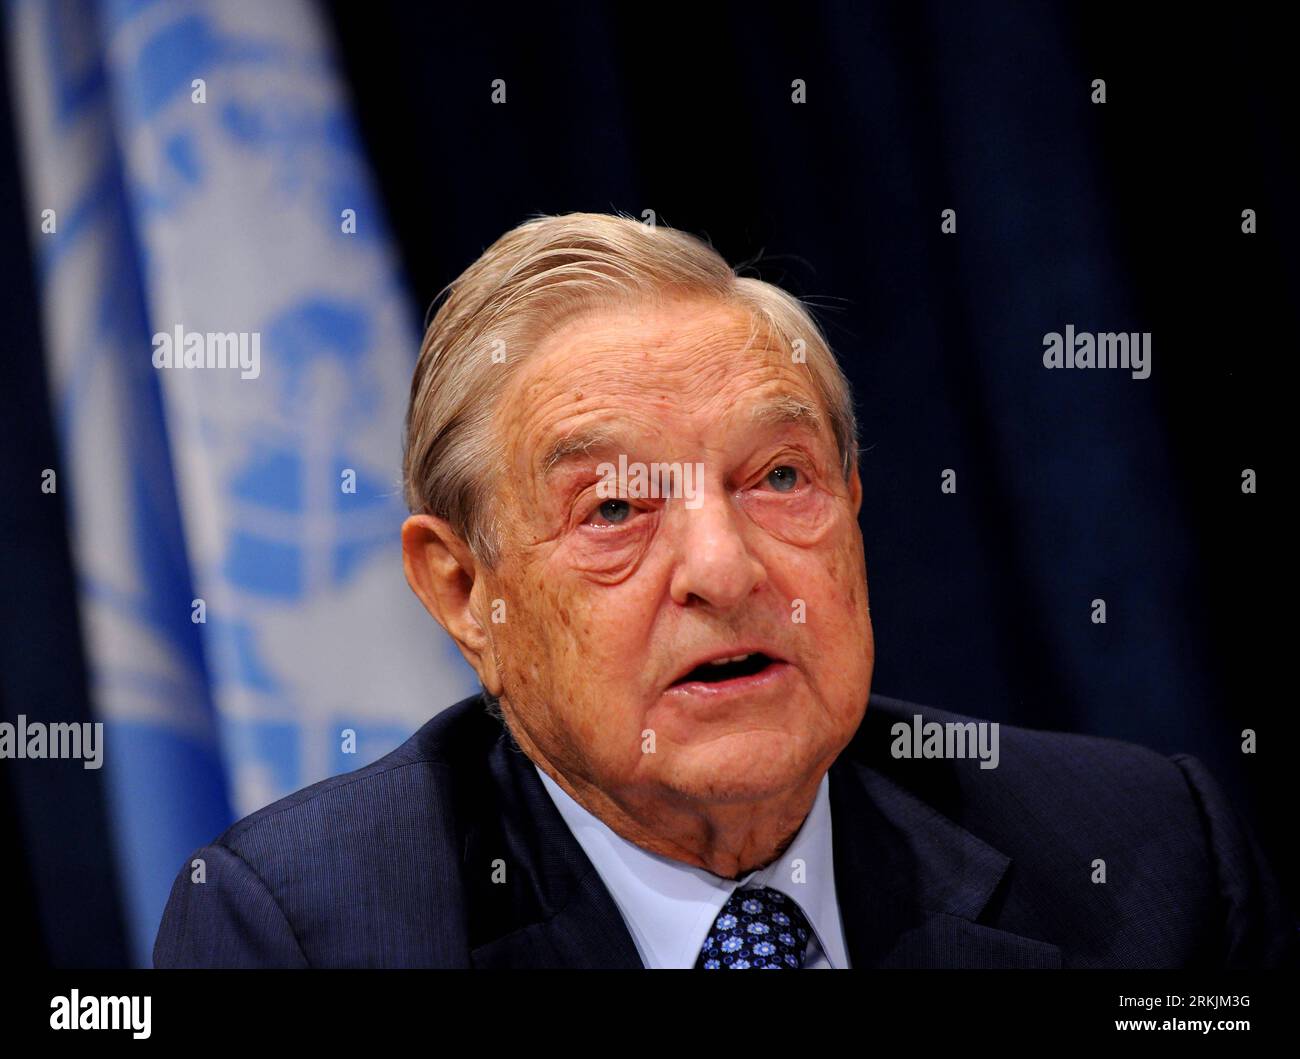 George Soros, 90. Geburtstag am 12. August 111003 -- NEW YORK, Oct. 3, 2011 Xinhua -- George Soros, founder and chairman of the Open Society Foundations, attends a news conference at the UN headquarters in New York, the United States, Oct. 3, 2011. The Millennium Villages Project, a science-based partnership in rural Arrica working to achieve the Millennium Development Goals, launched its second phase here Monday. The program will move into its next and final phase with more than 72 million U.S. dollars in new pledges, including 47.4 million U.S. dollars announced today by Soros. Xinhua/Shen H Stock Photo